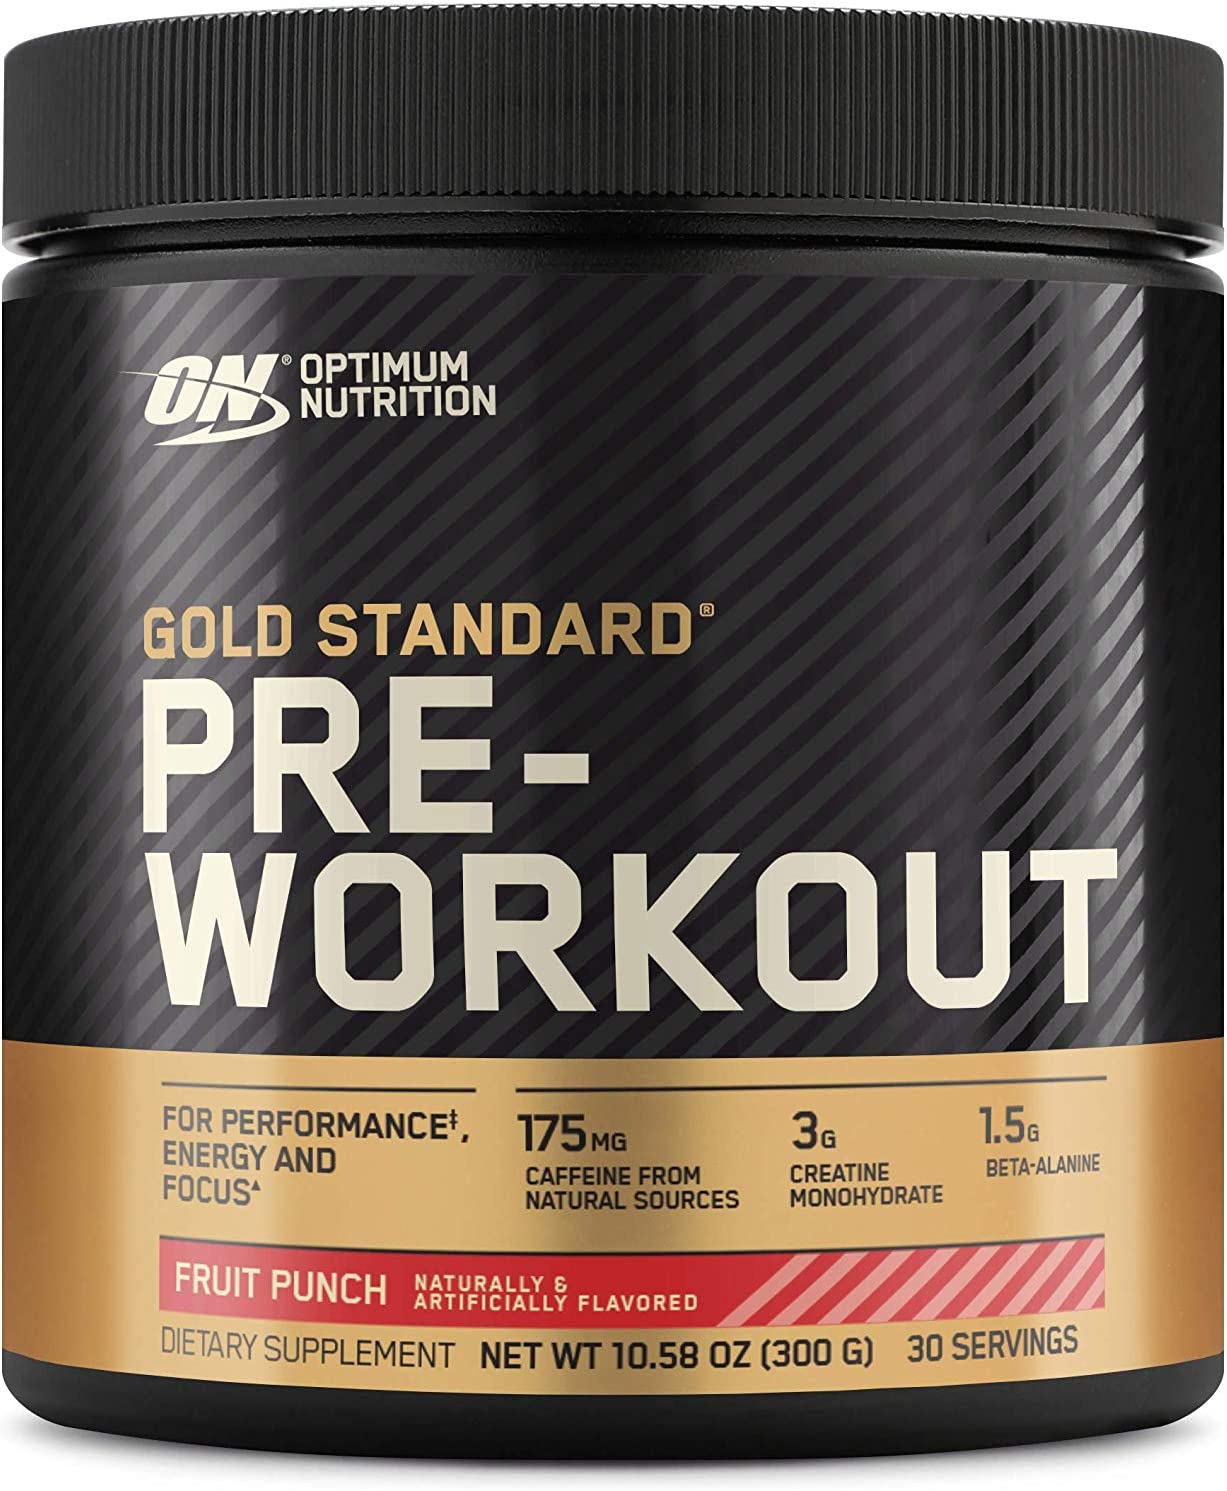 Optimum Nutrition Energy Boosting Pre-Workout Supplement